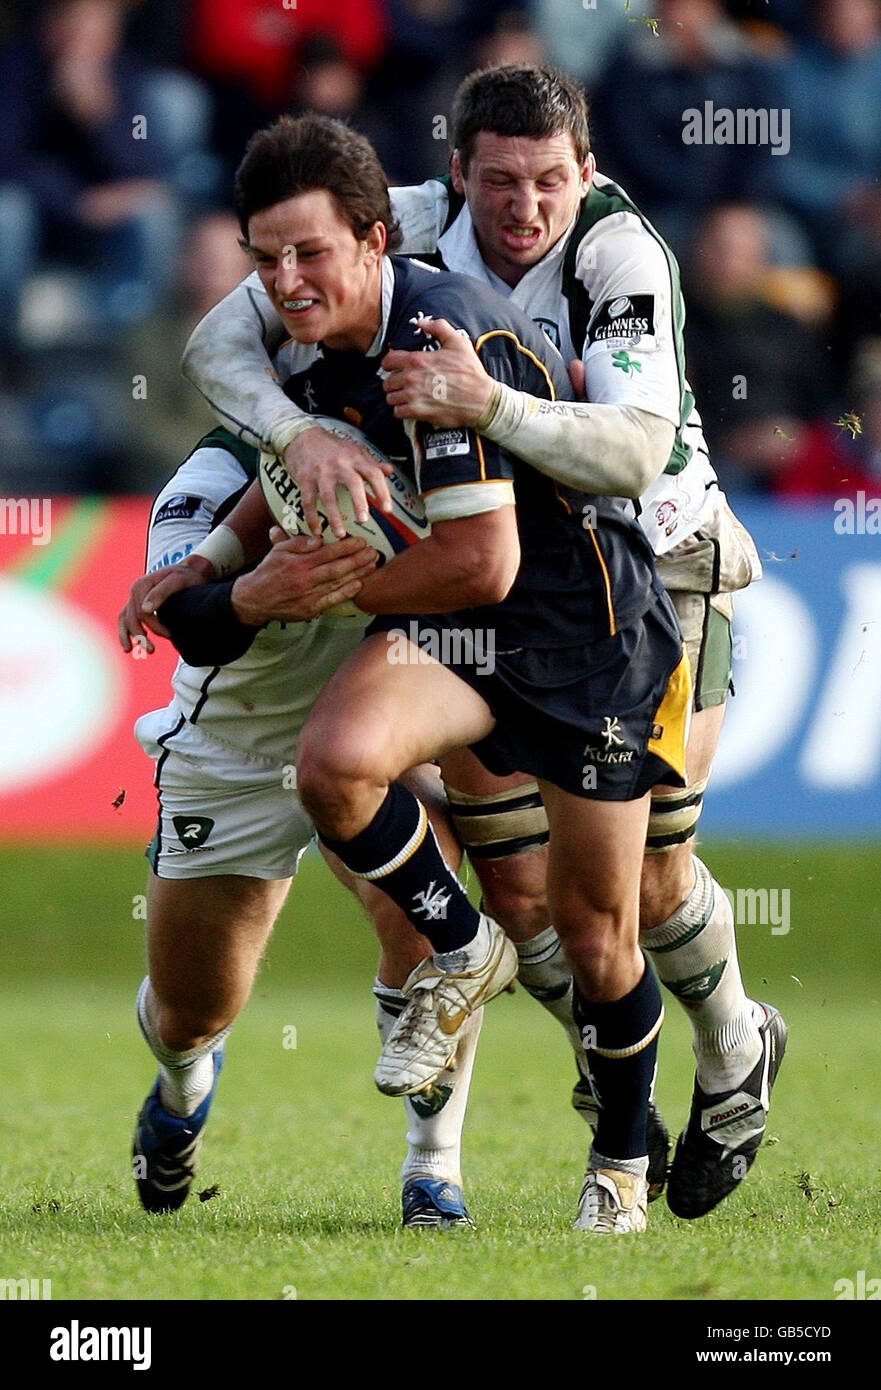 Worcester's Jonny Arr is tackled by London Irish's Declan Danaher during the EDF Energy Cup at Sixways Stadium, Worcester. Stock Photo